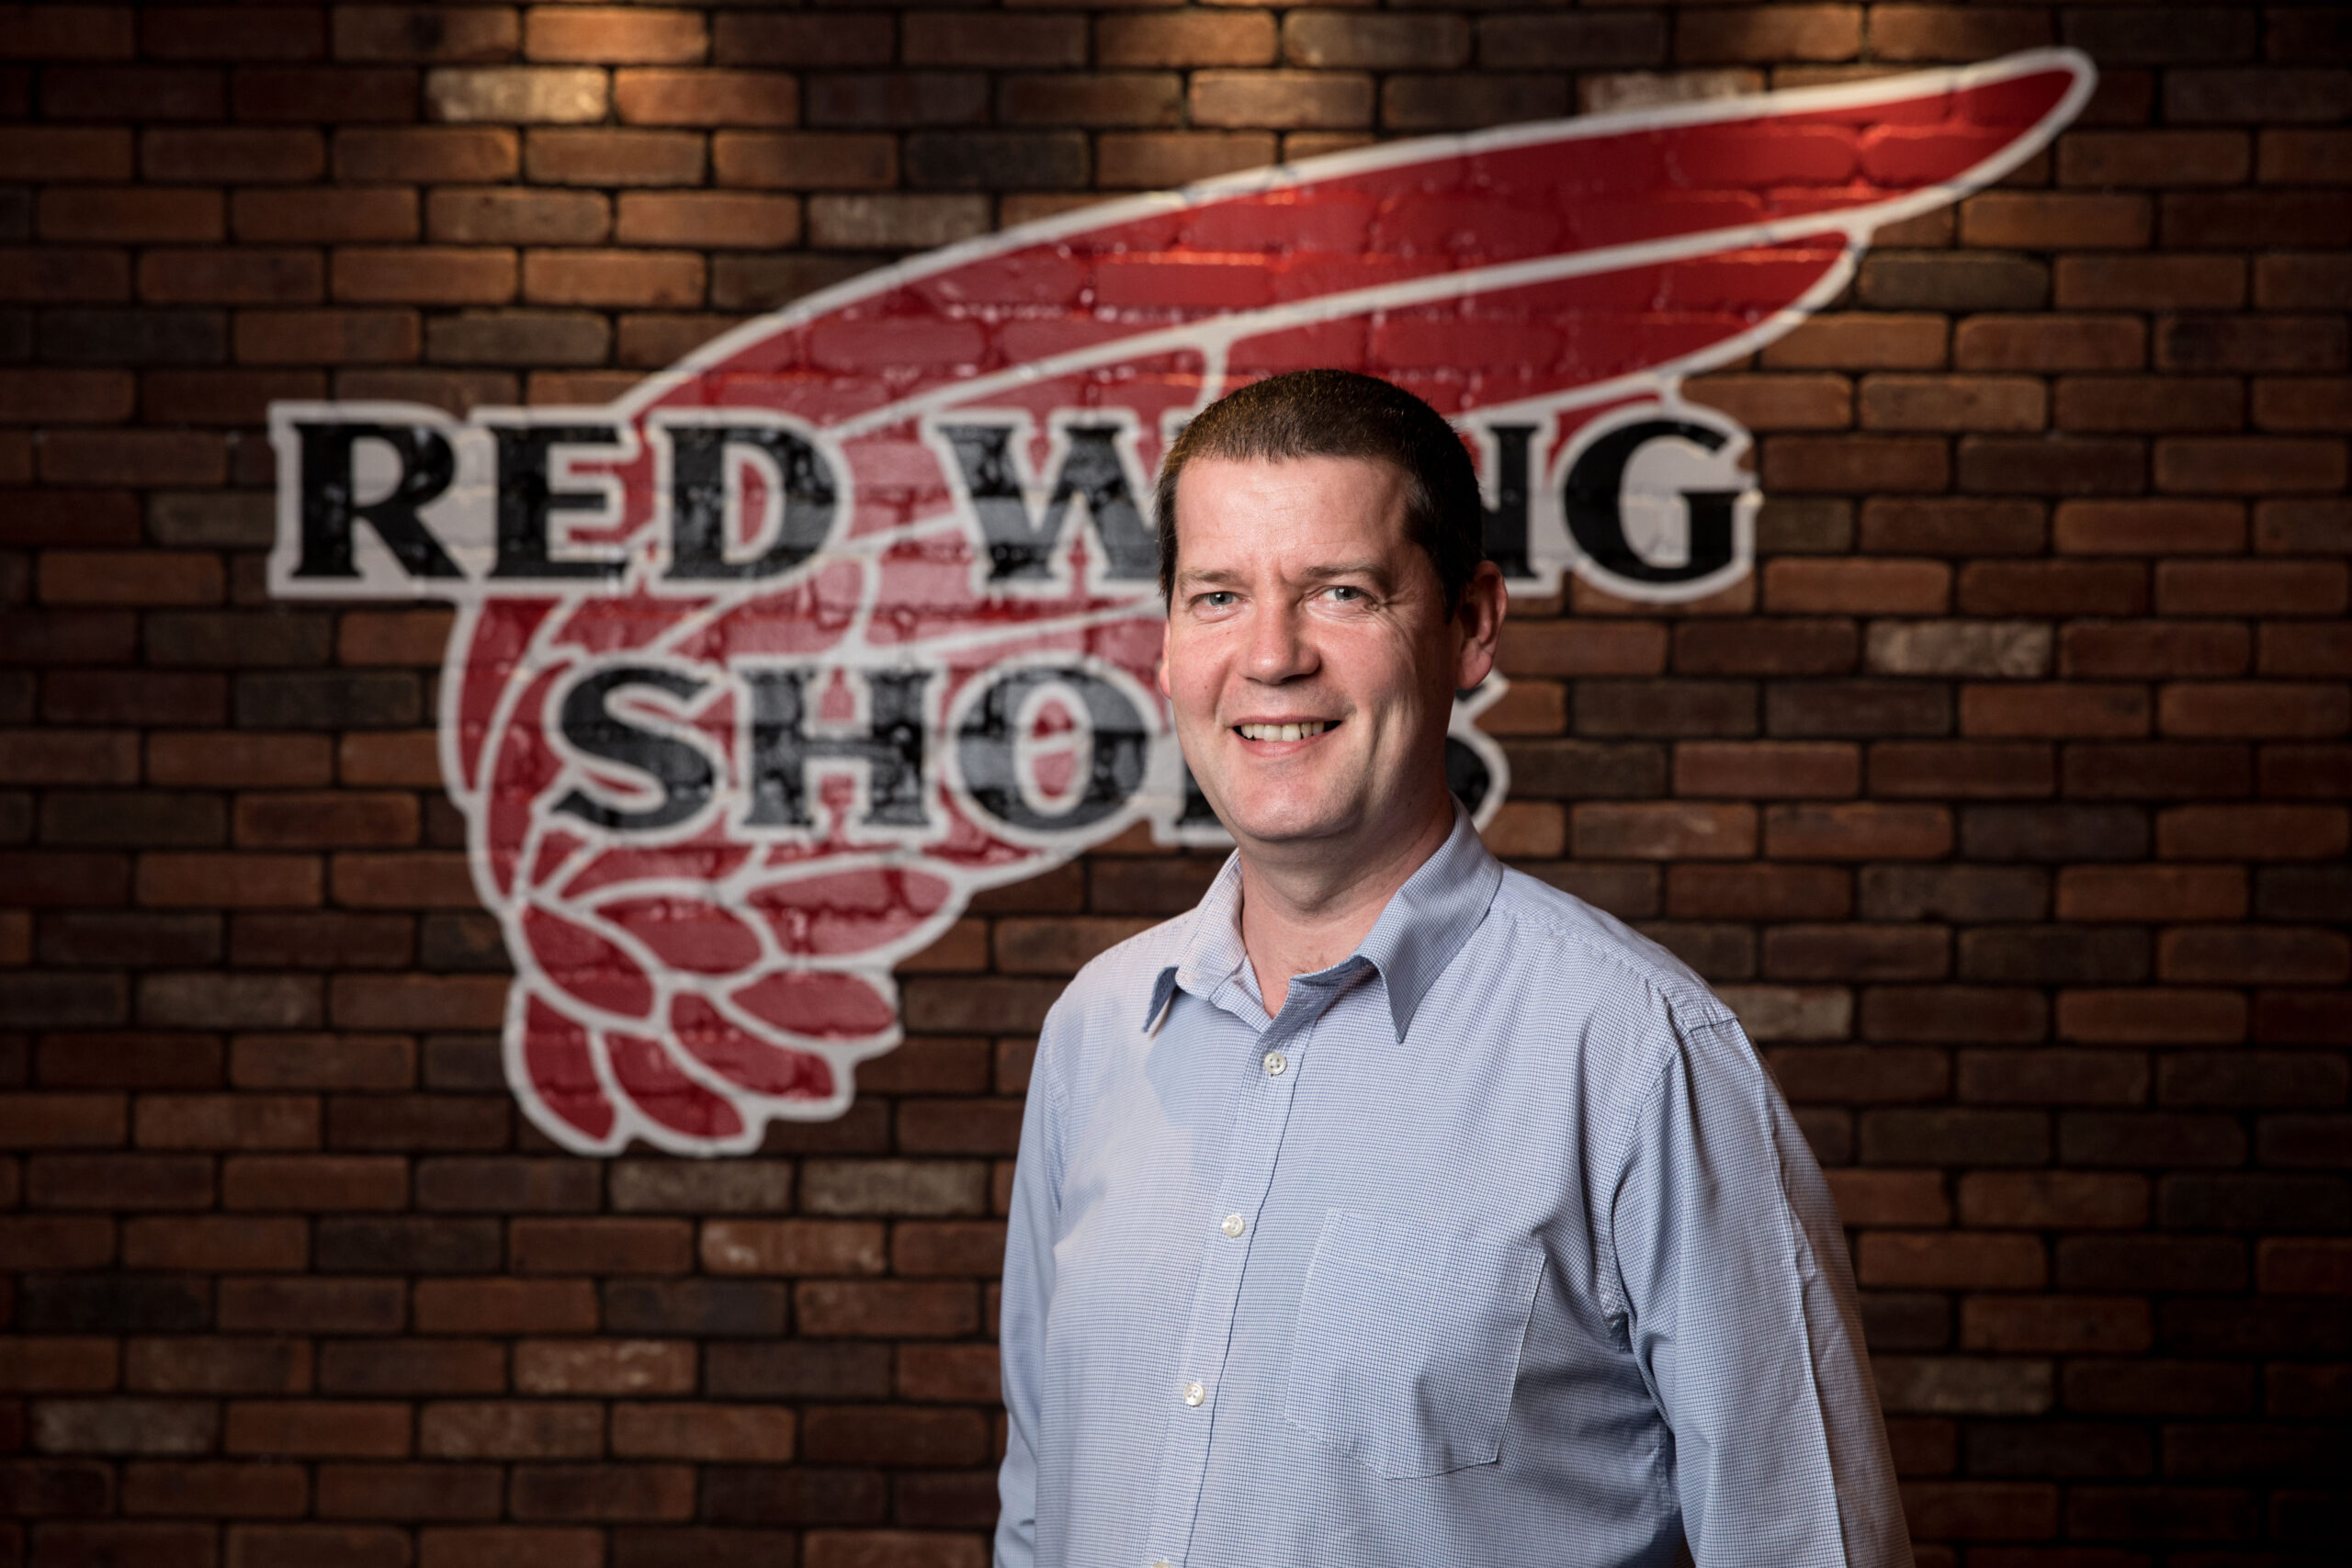 MEMBER NEWS: Red Wing strengthens leadership team with sales promotion